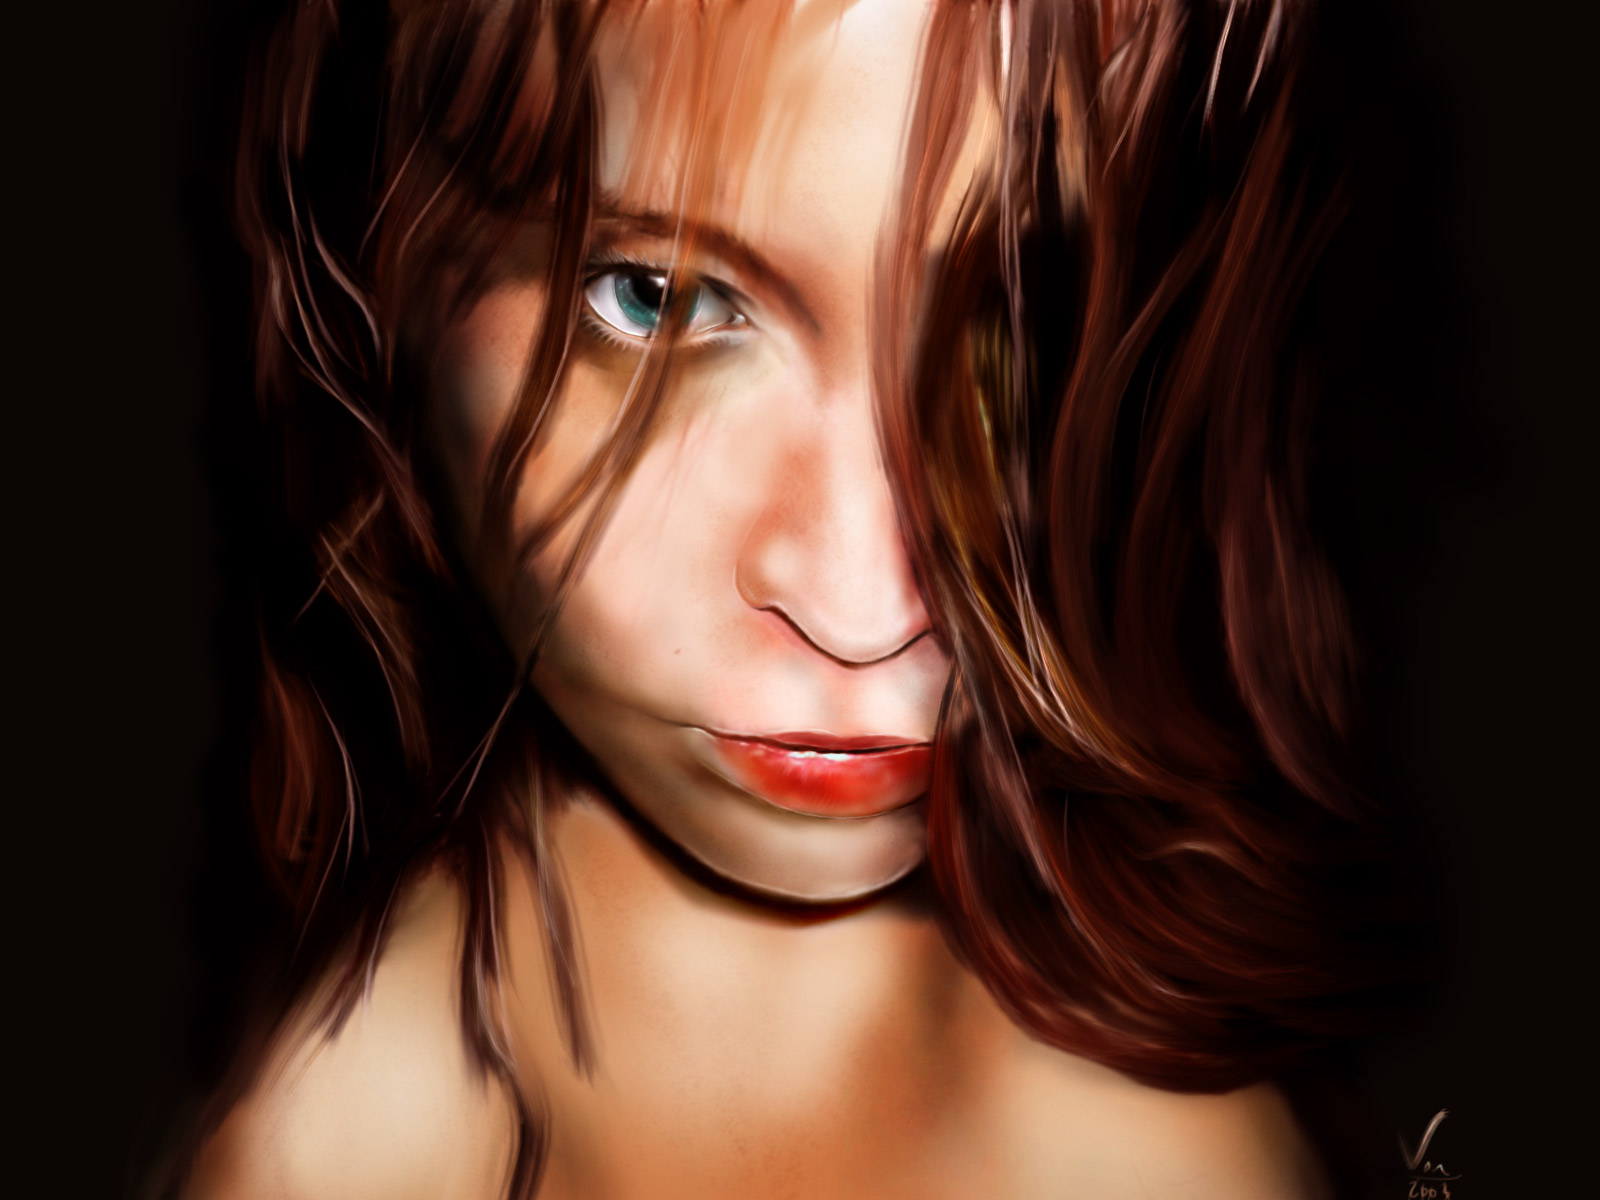 A portrait for the Portrait Thread started by enayla .

3 or 4 hours of draw with a wacom ...